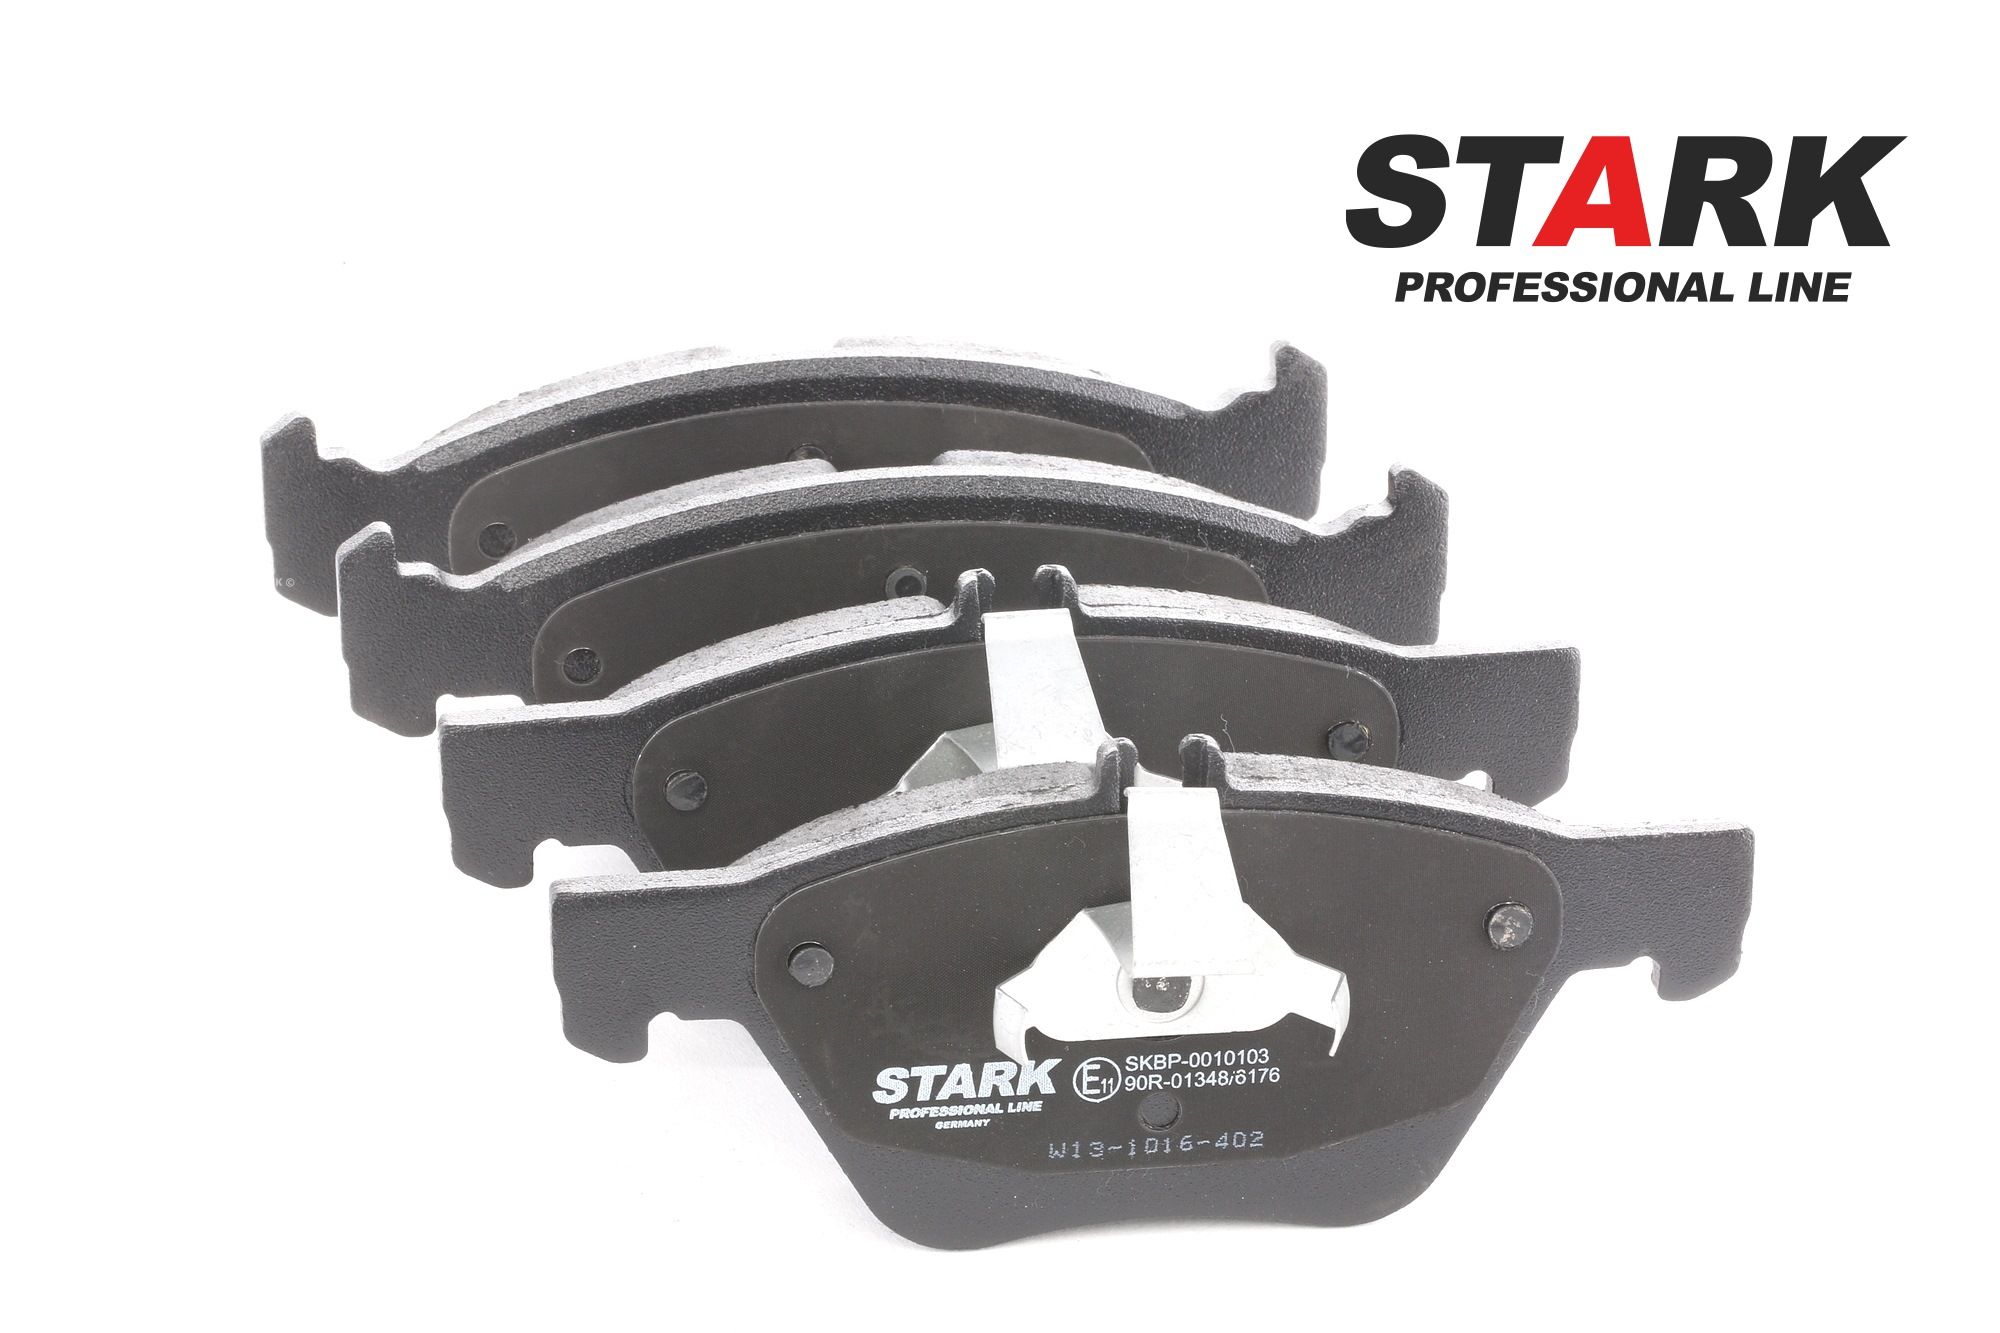 STARK SKBP-0010103 Brake pad set Front Axle, prepared for wear indicator, with piston clip, with spring